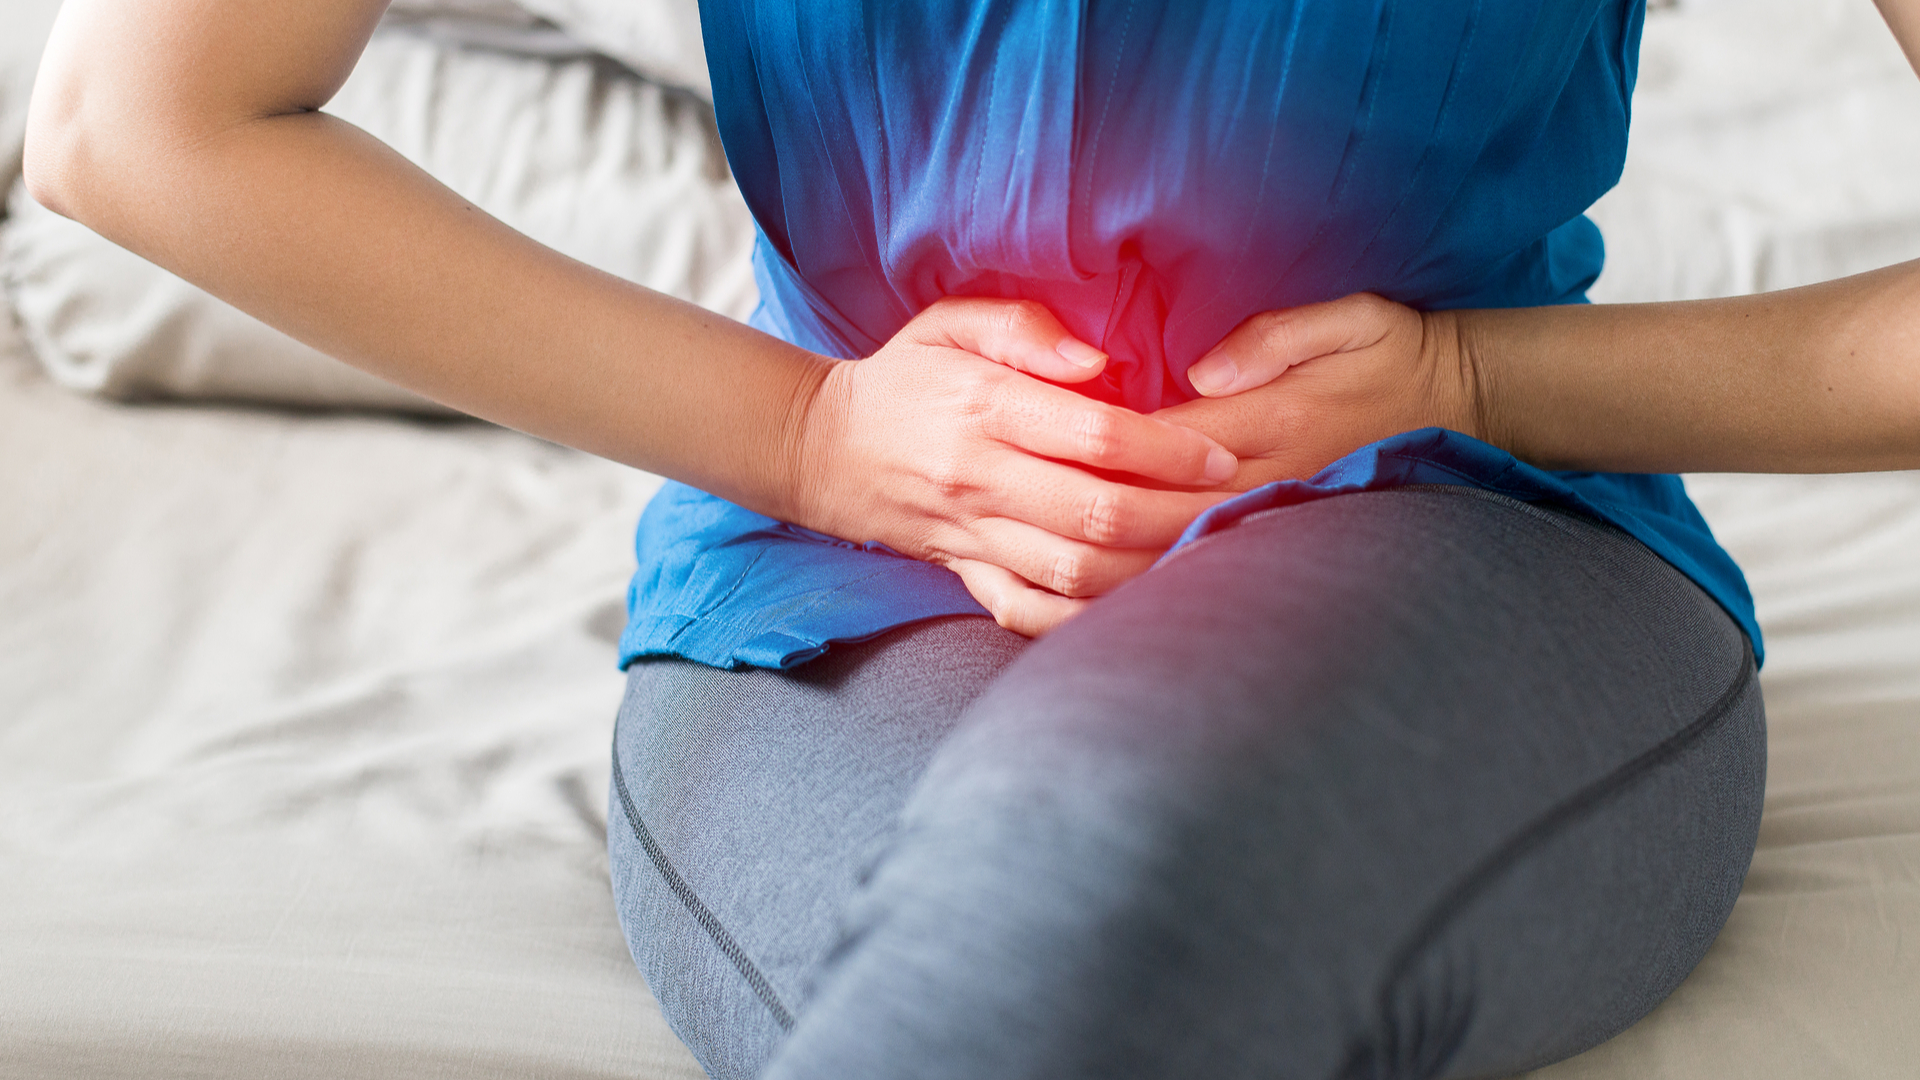 Woman with P.O.P. holding her stomach in pain with red glowing light over her hands